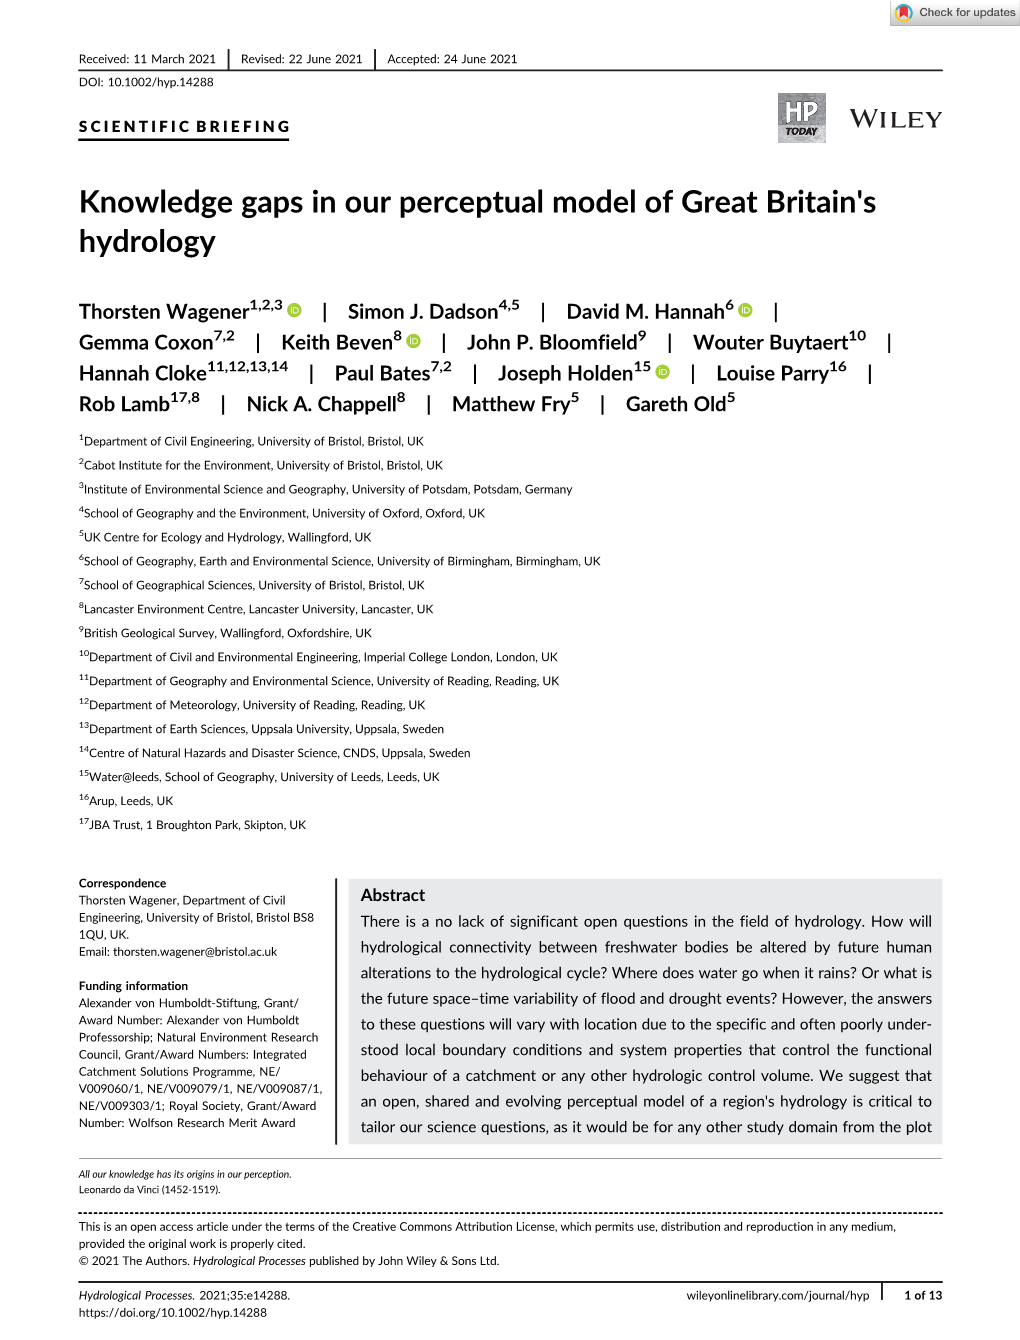 Knowledge Gaps in Our Perceptual Model of Great Britain's Hydrology